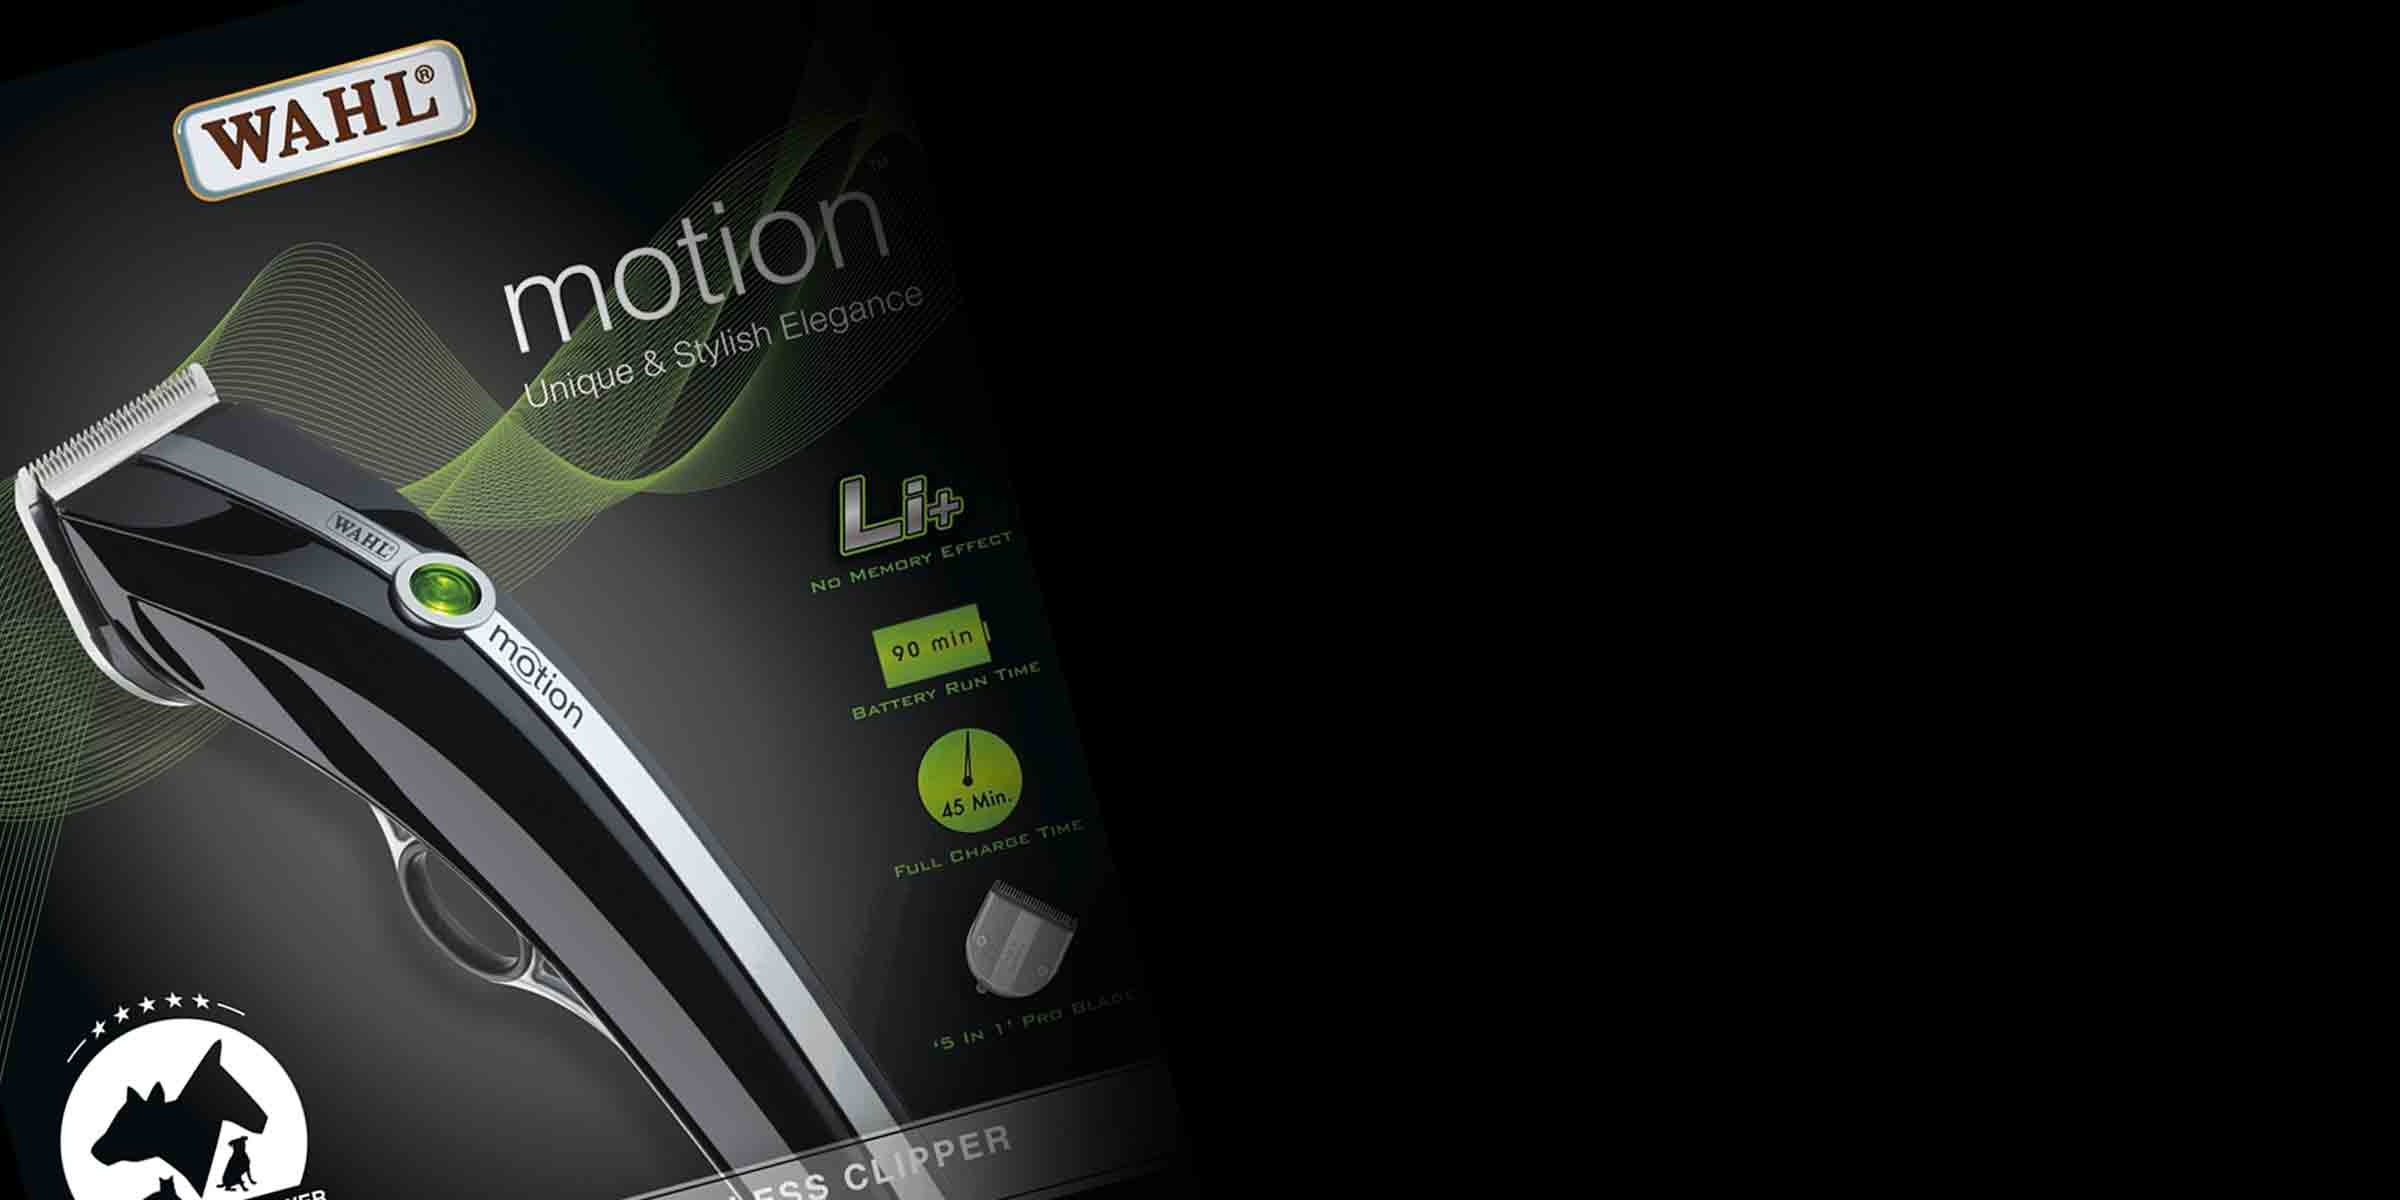 wahl motion lithium